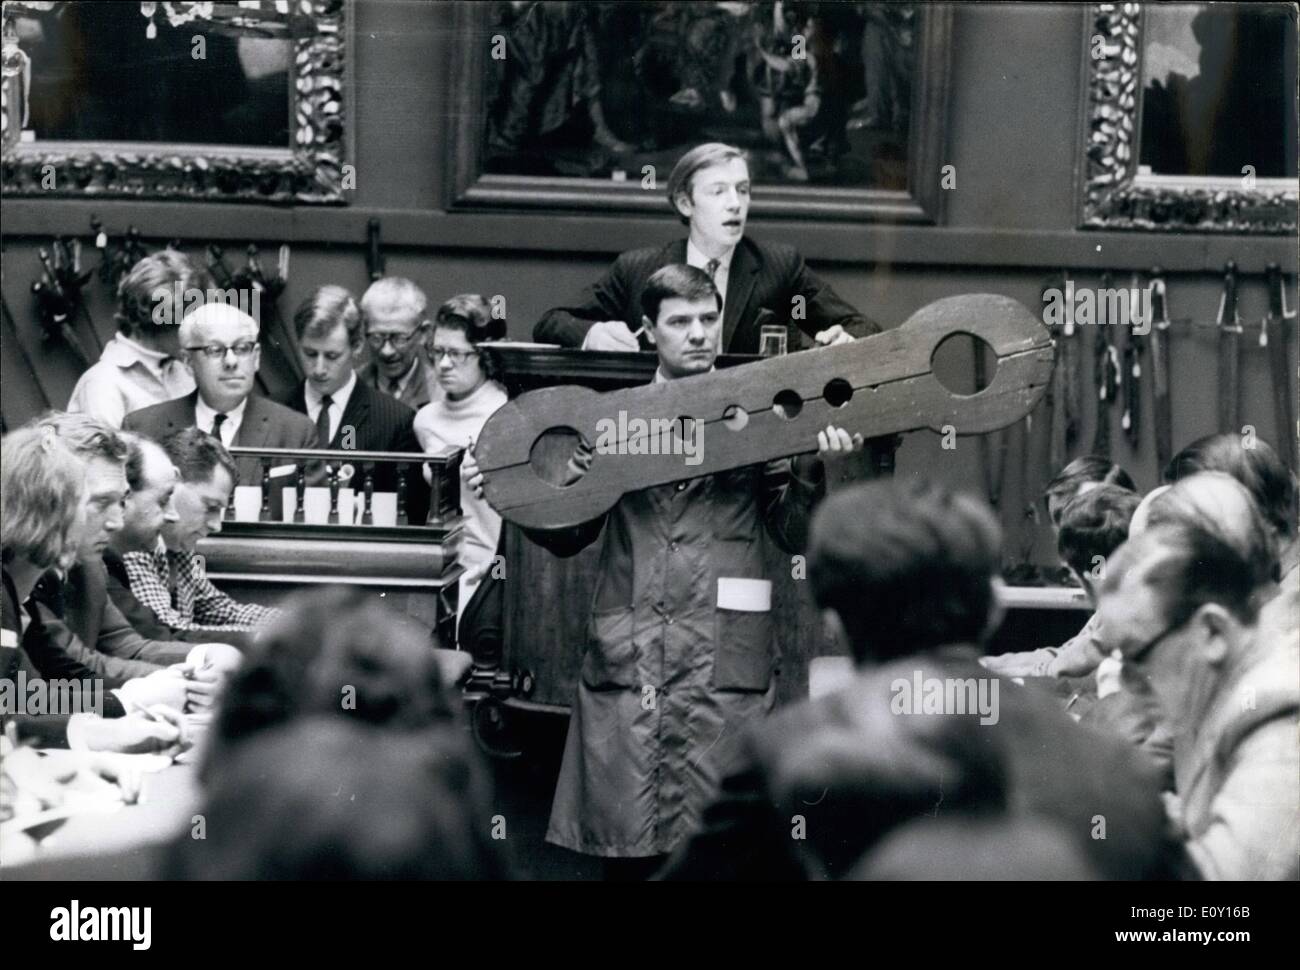 Mar. 03, 1968 - Sale of Torture Instruments at Sotheby's. A collection of Torture Instruments, formerly in the Royal Castle, Nuremburg, were up for sale today at Sotheby's. Keystone Photo Shows: Stocks being auctioned during today's sale of torture instruments at Sotheby's. Stock Photo